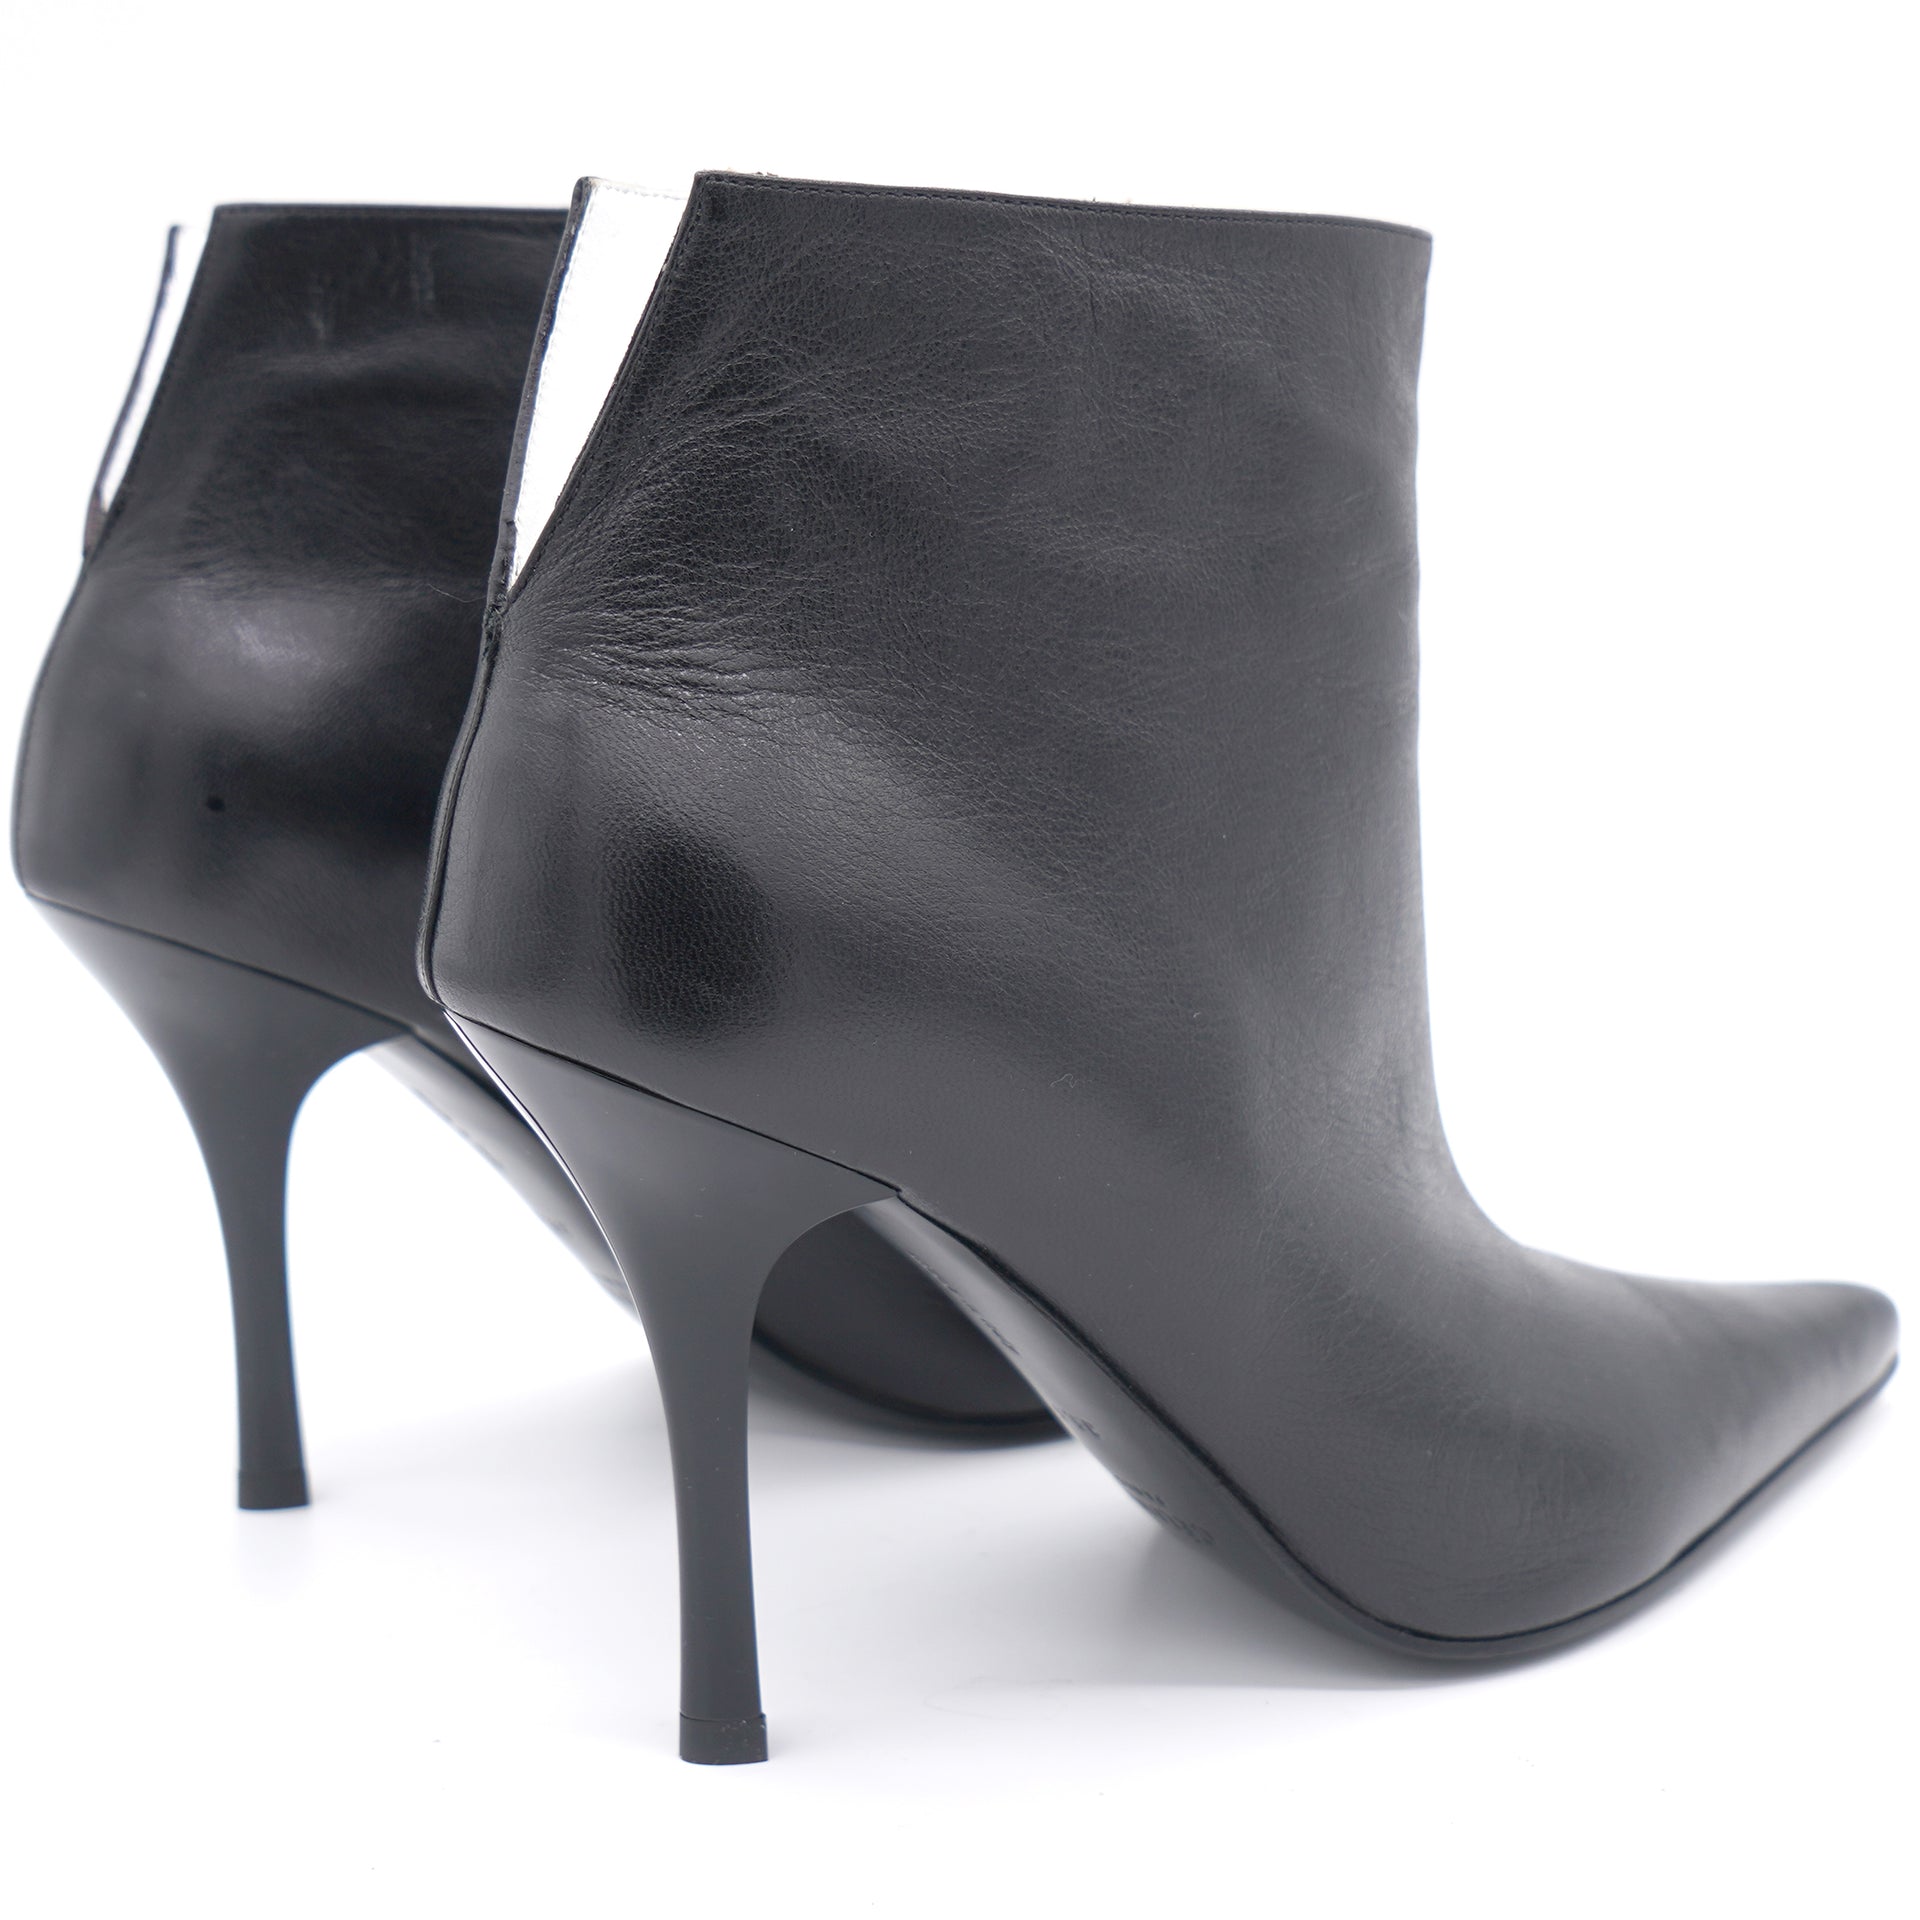 Motor Ankle Boots In Black 35.5